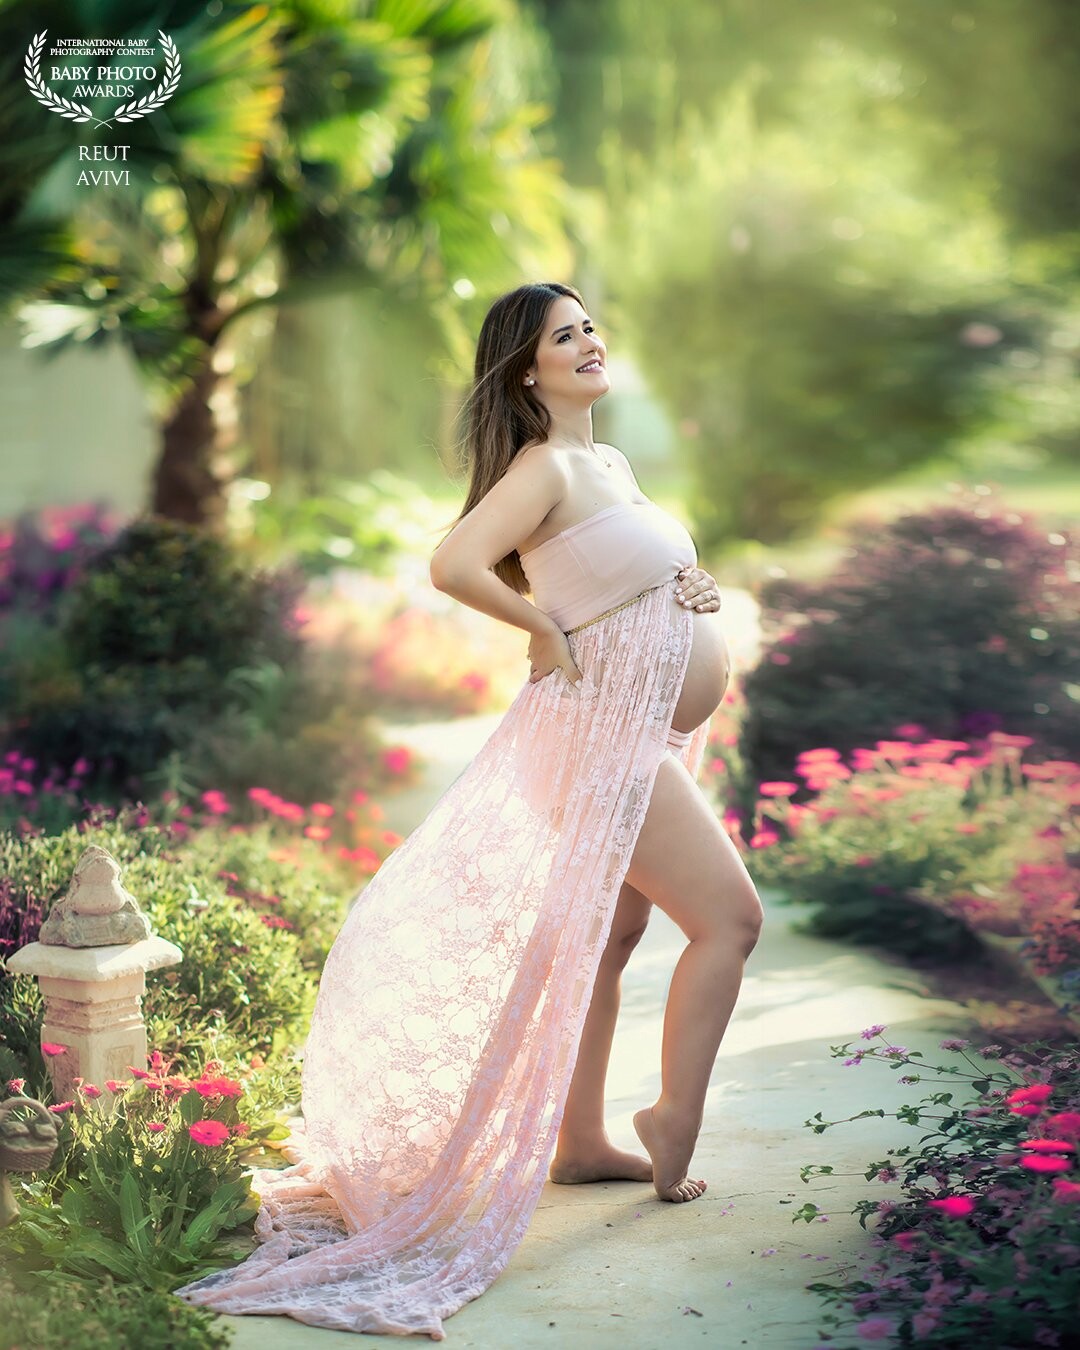 A perfect memory of the pregnancy in the wonderful garden next to my studio, the planning that a magical photo will come out exceeded expectations